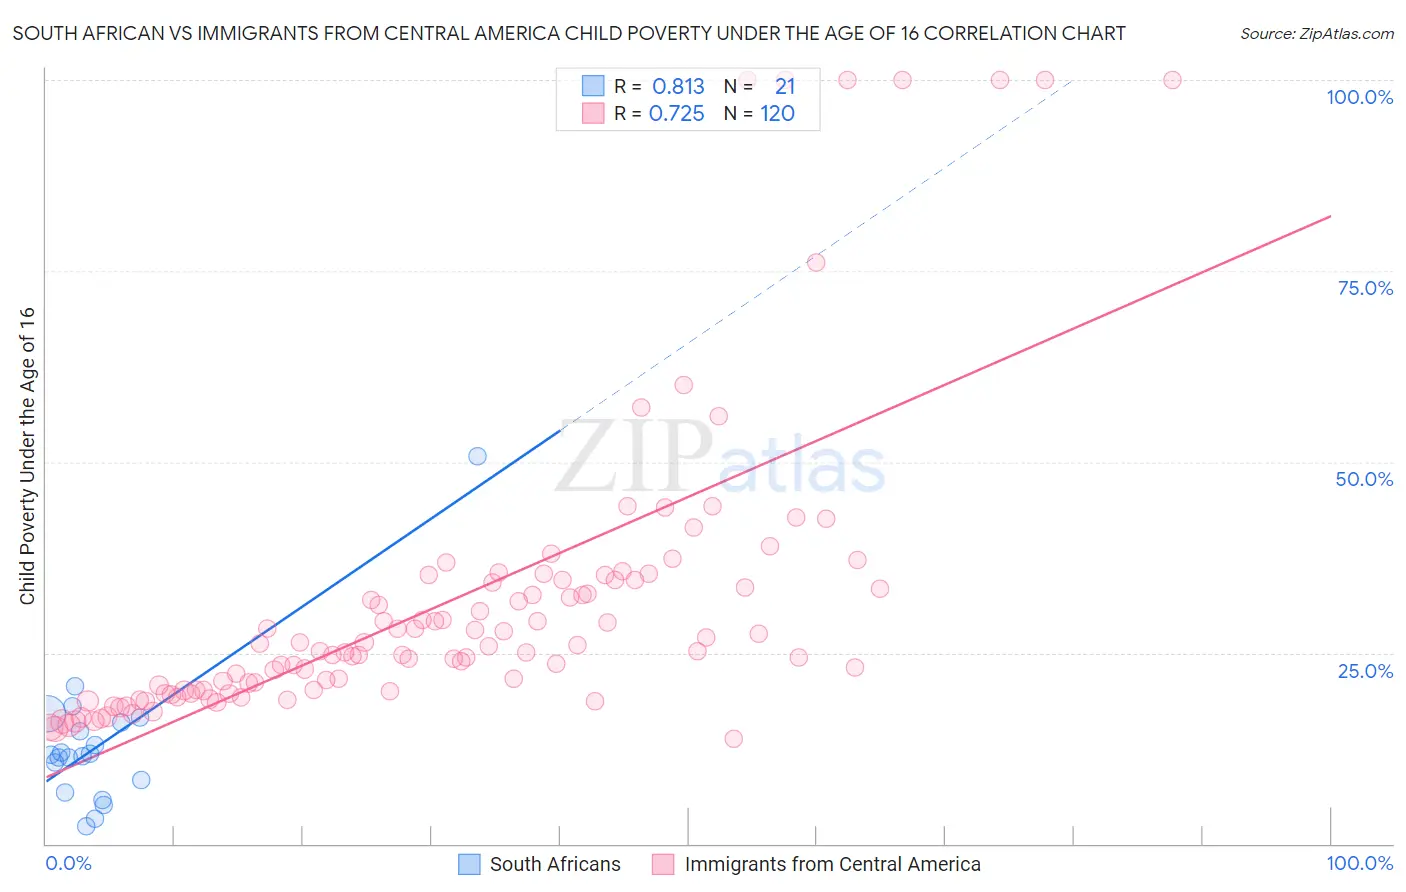 South African vs Immigrants from Central America Child Poverty Under the Age of 16